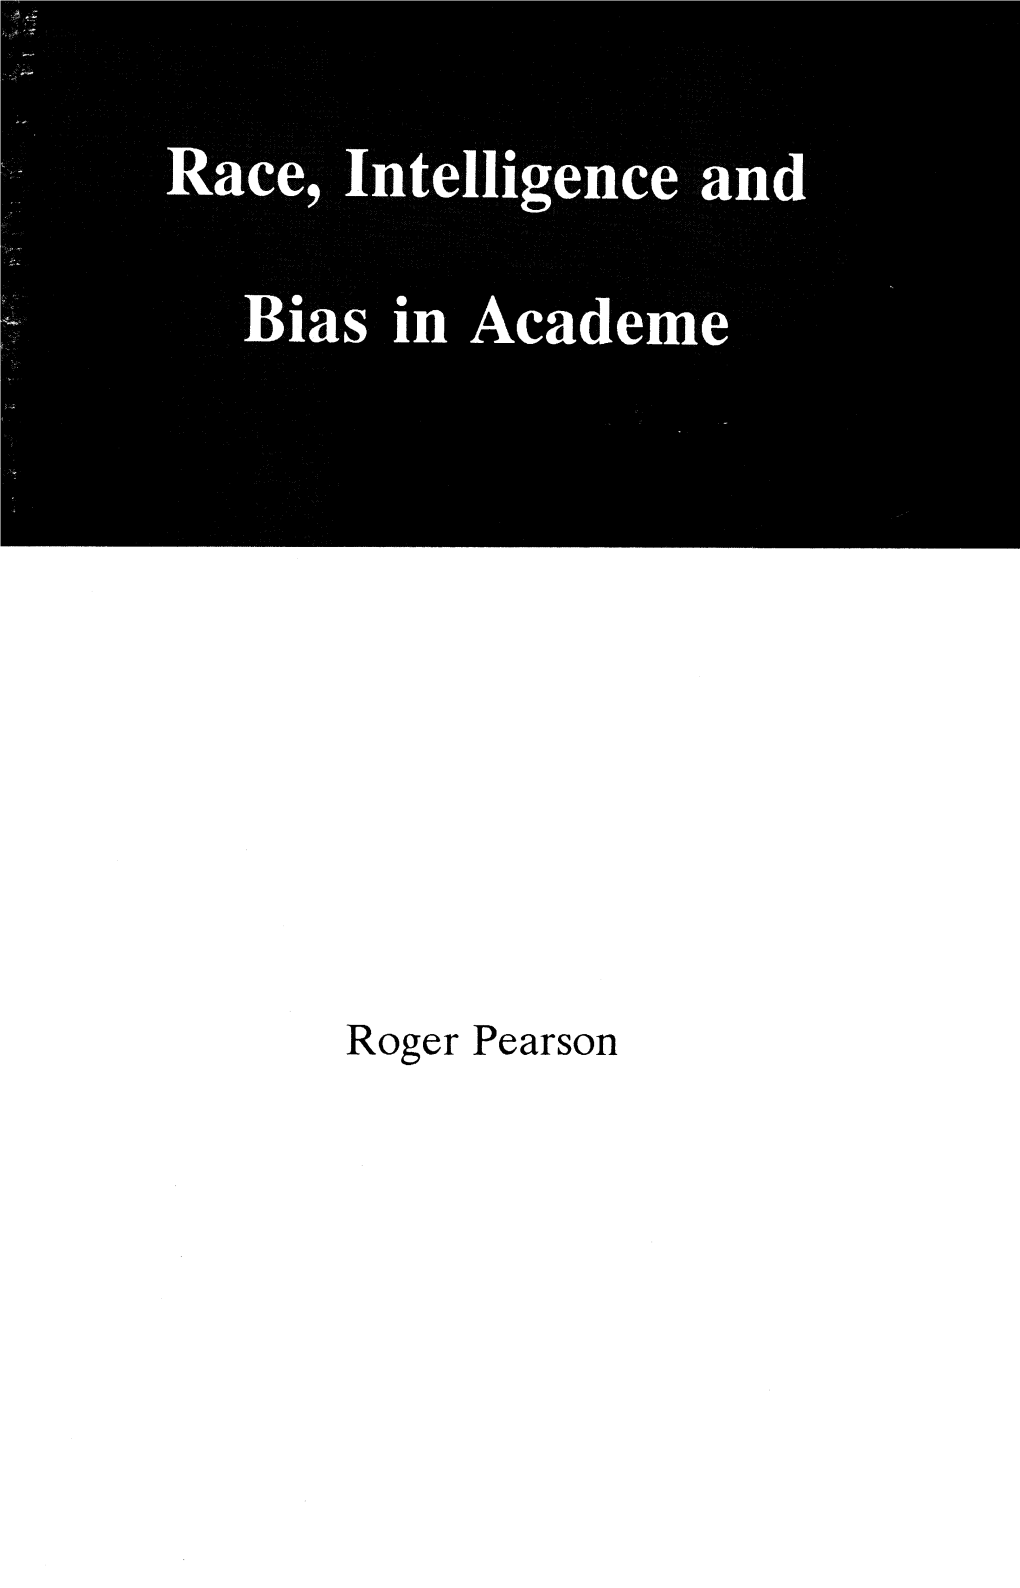 Race, Intelligence and Bias in Academe